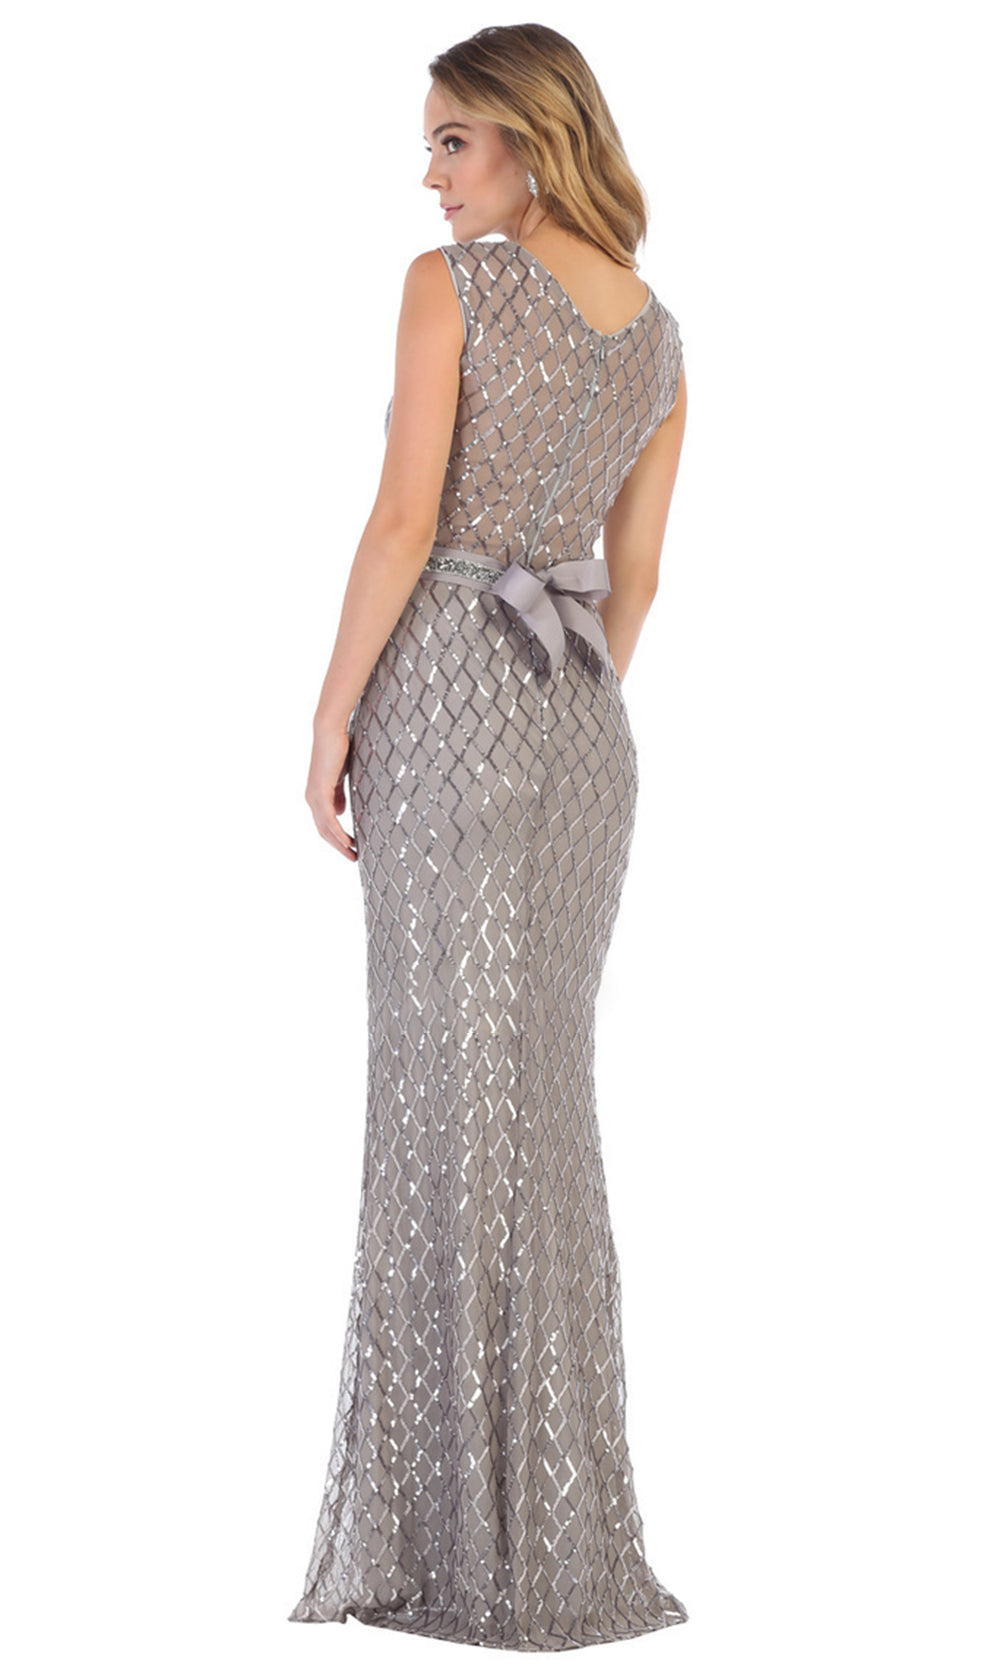 May Queen - MQ1606 Sleeveless Jewel Column Gown In Silver